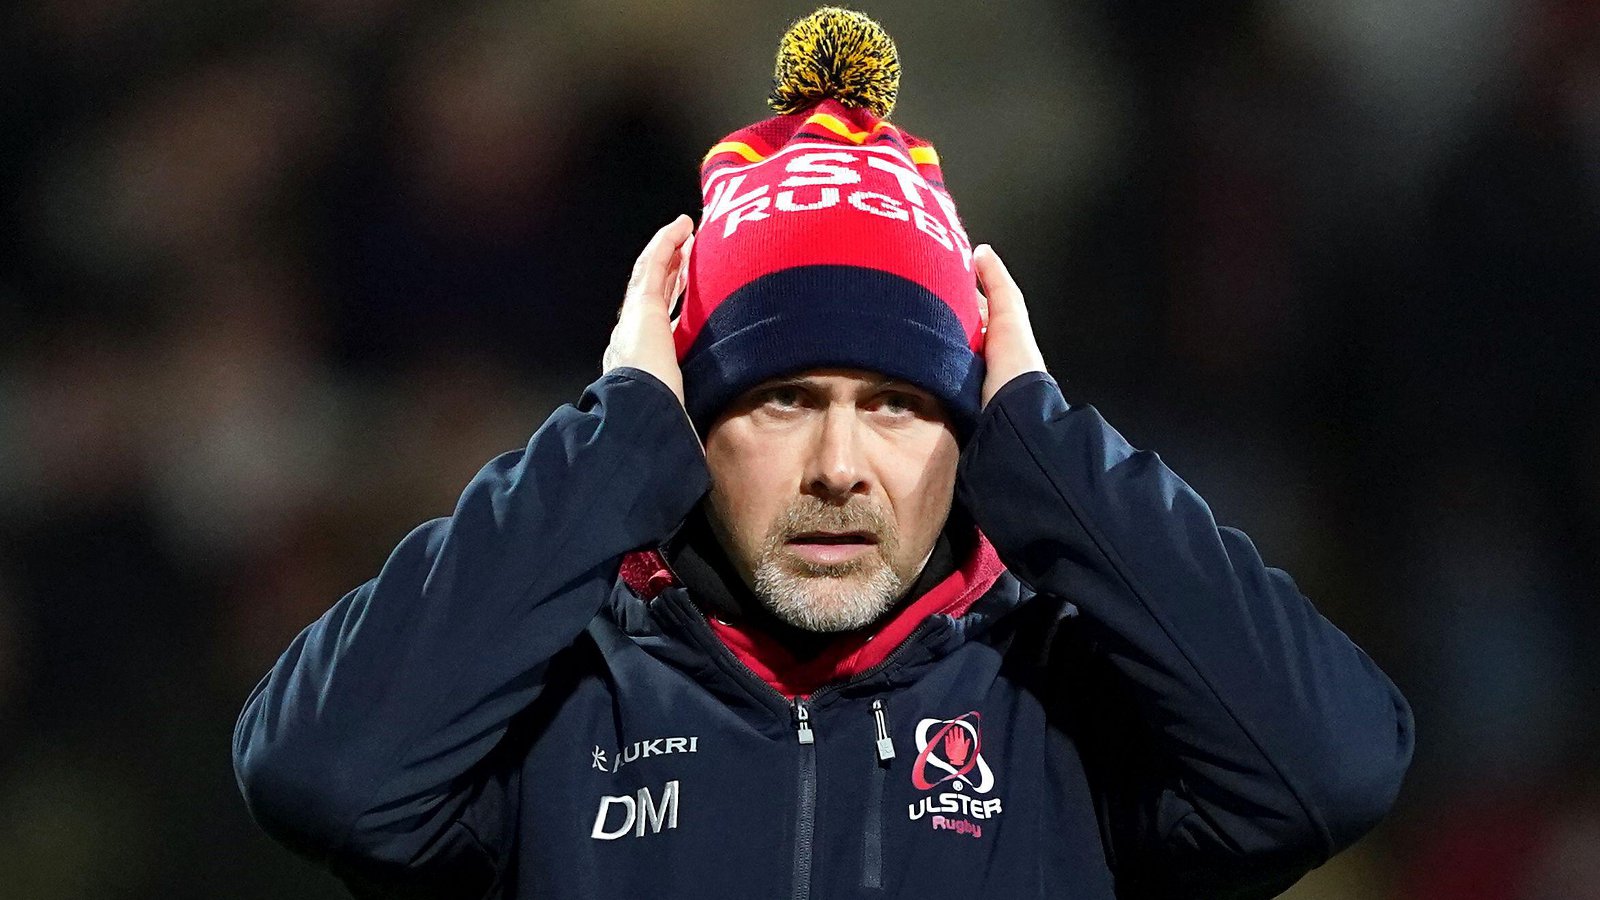 ulster axe head coach days after much-criticised ref rant – report